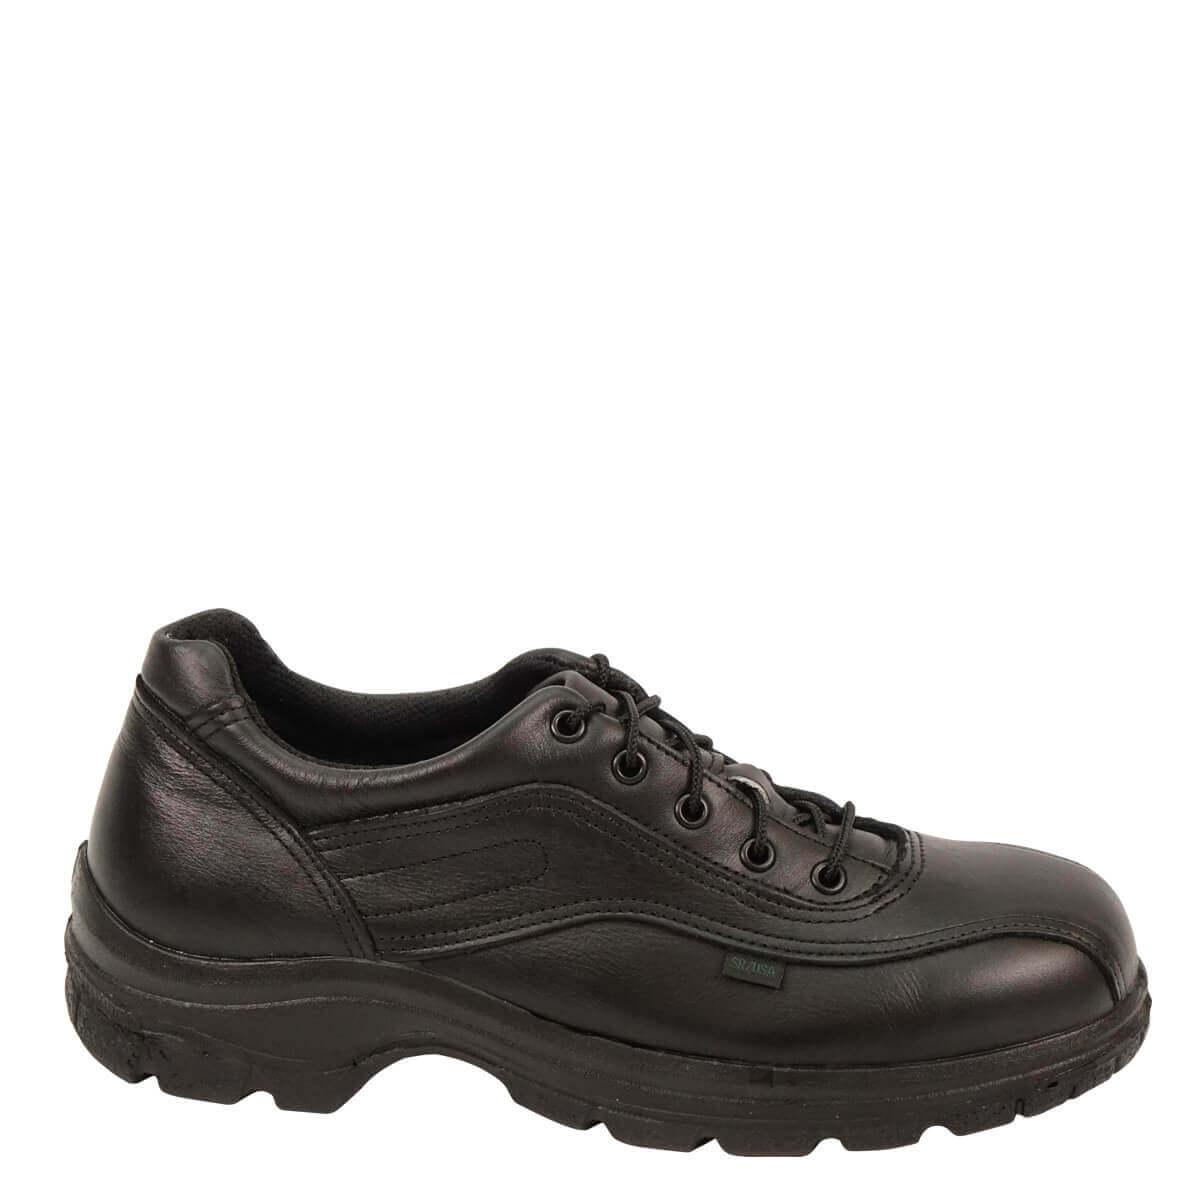 Women's Thorogood SOFT STREETS™ SERIES – DOUBLE TRACK OXFORD